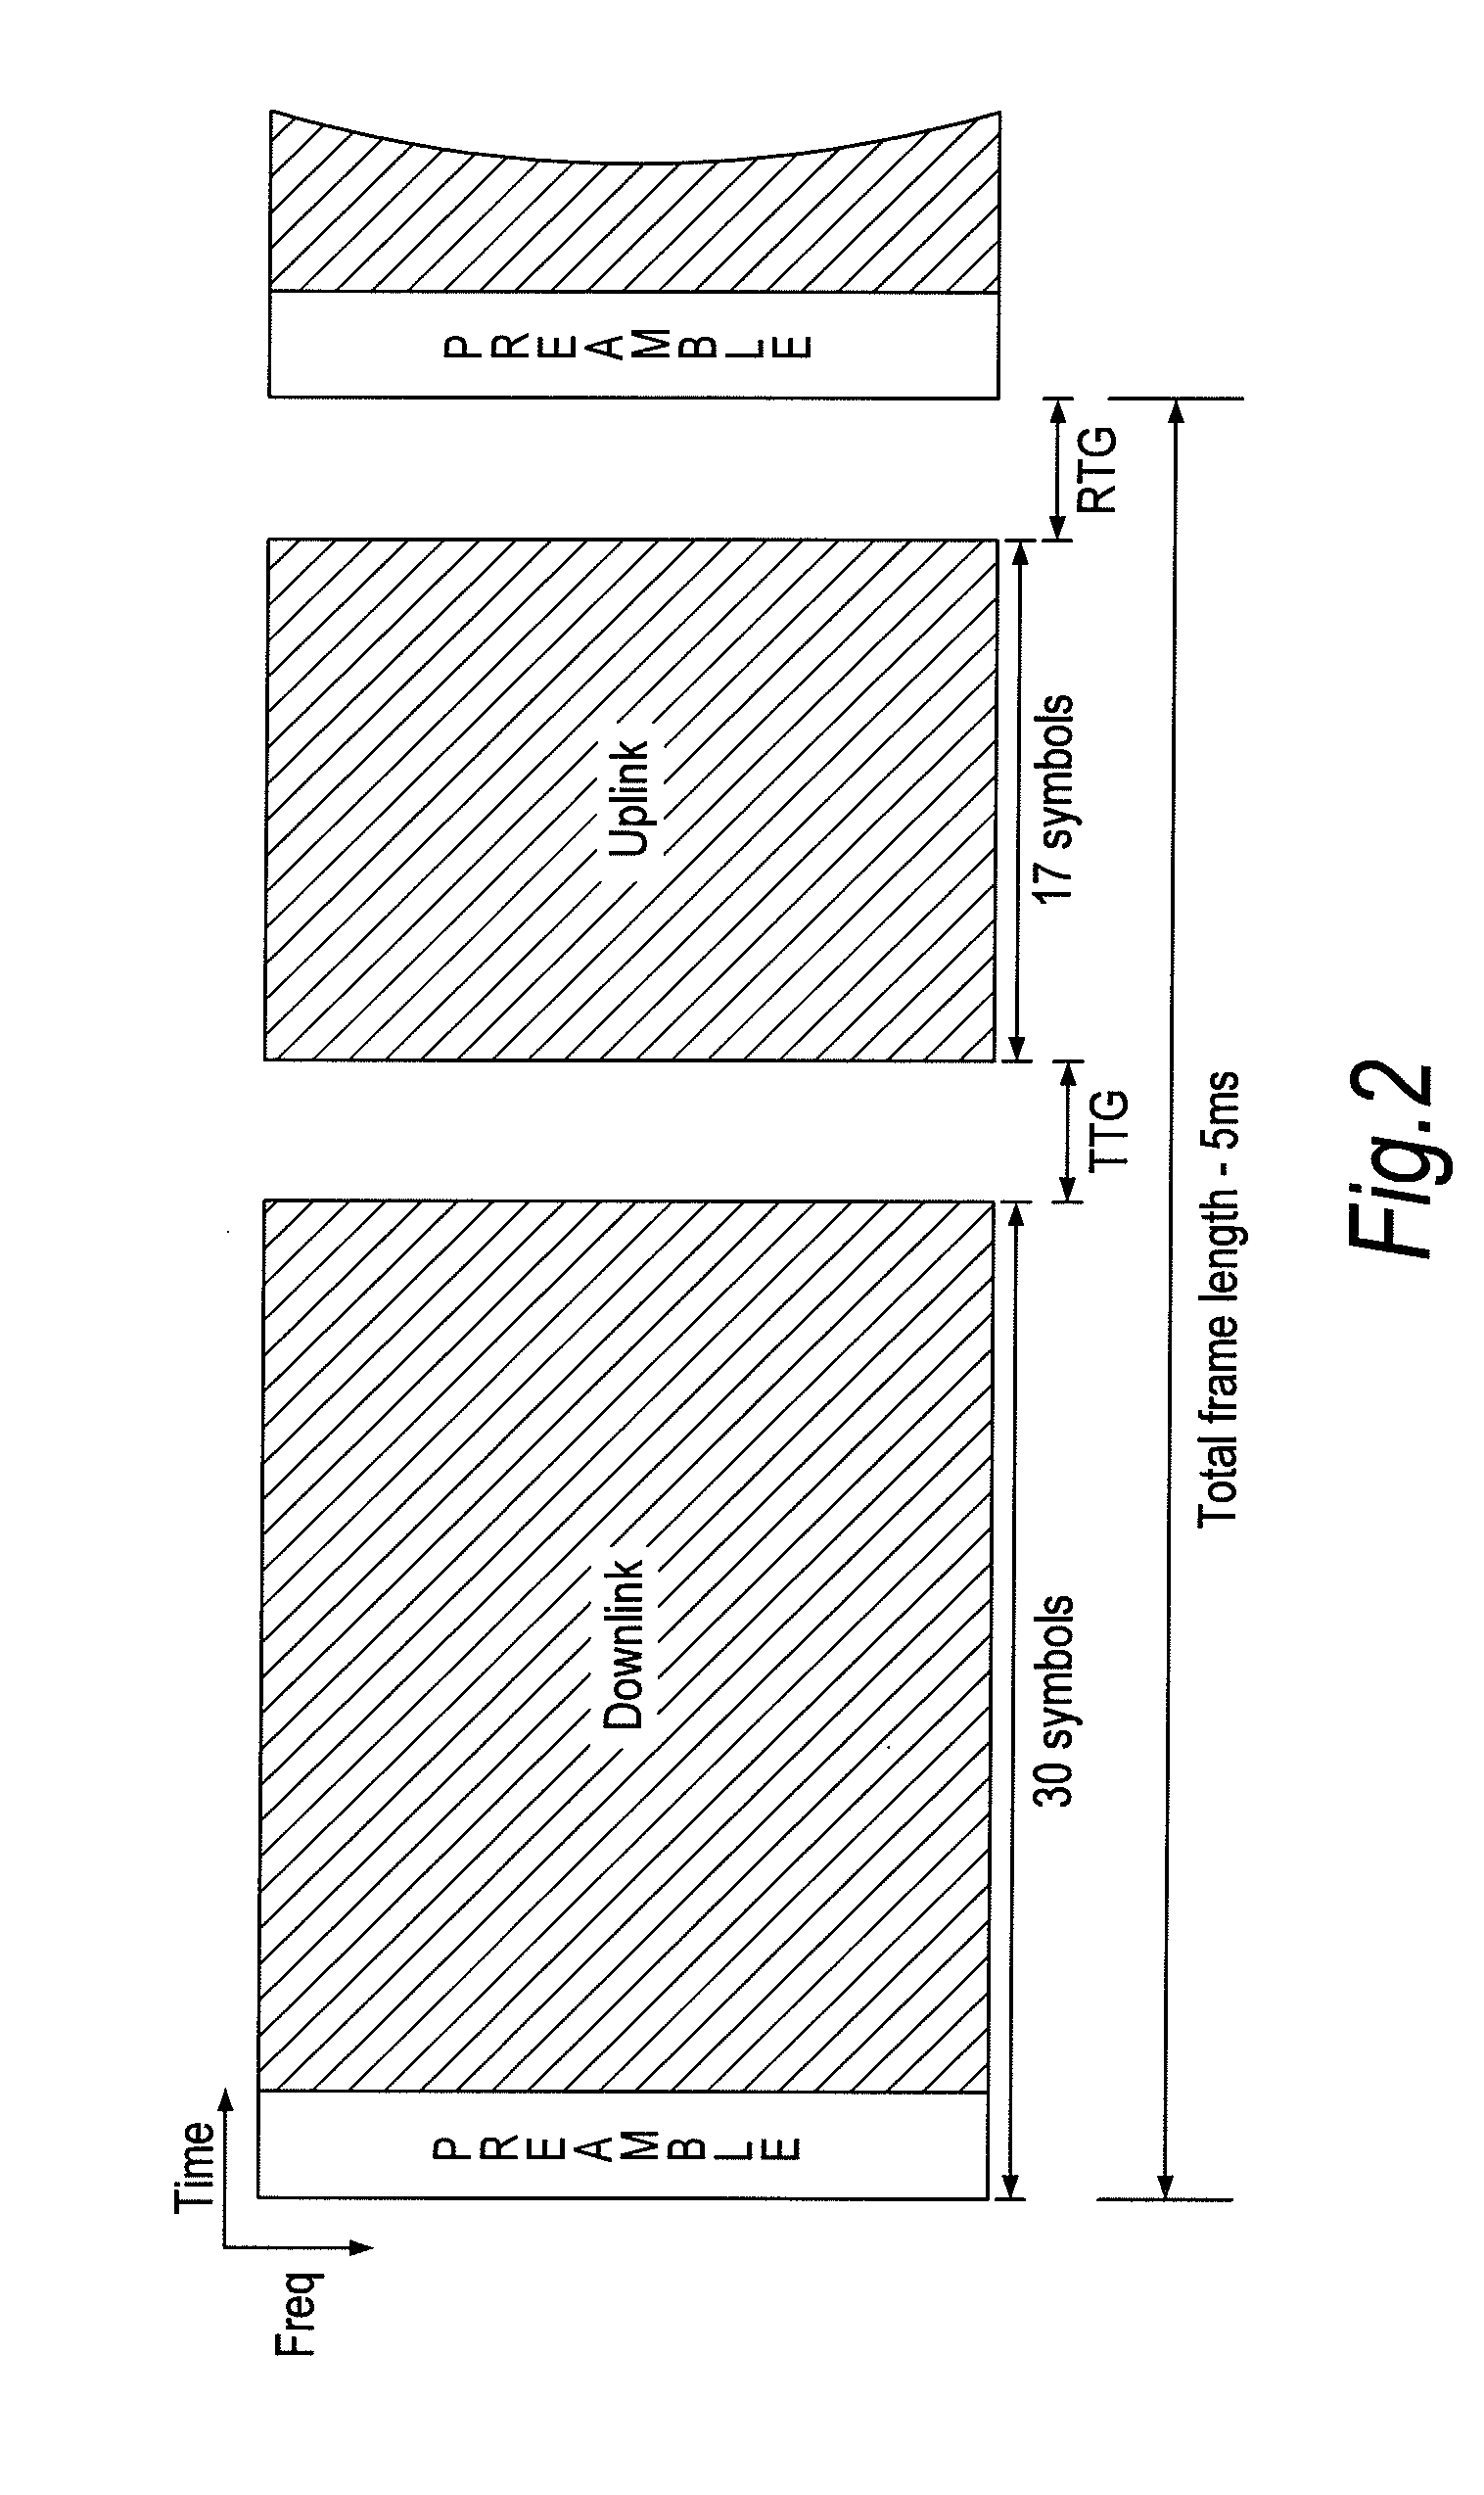 Frame structure for a wireless communication system